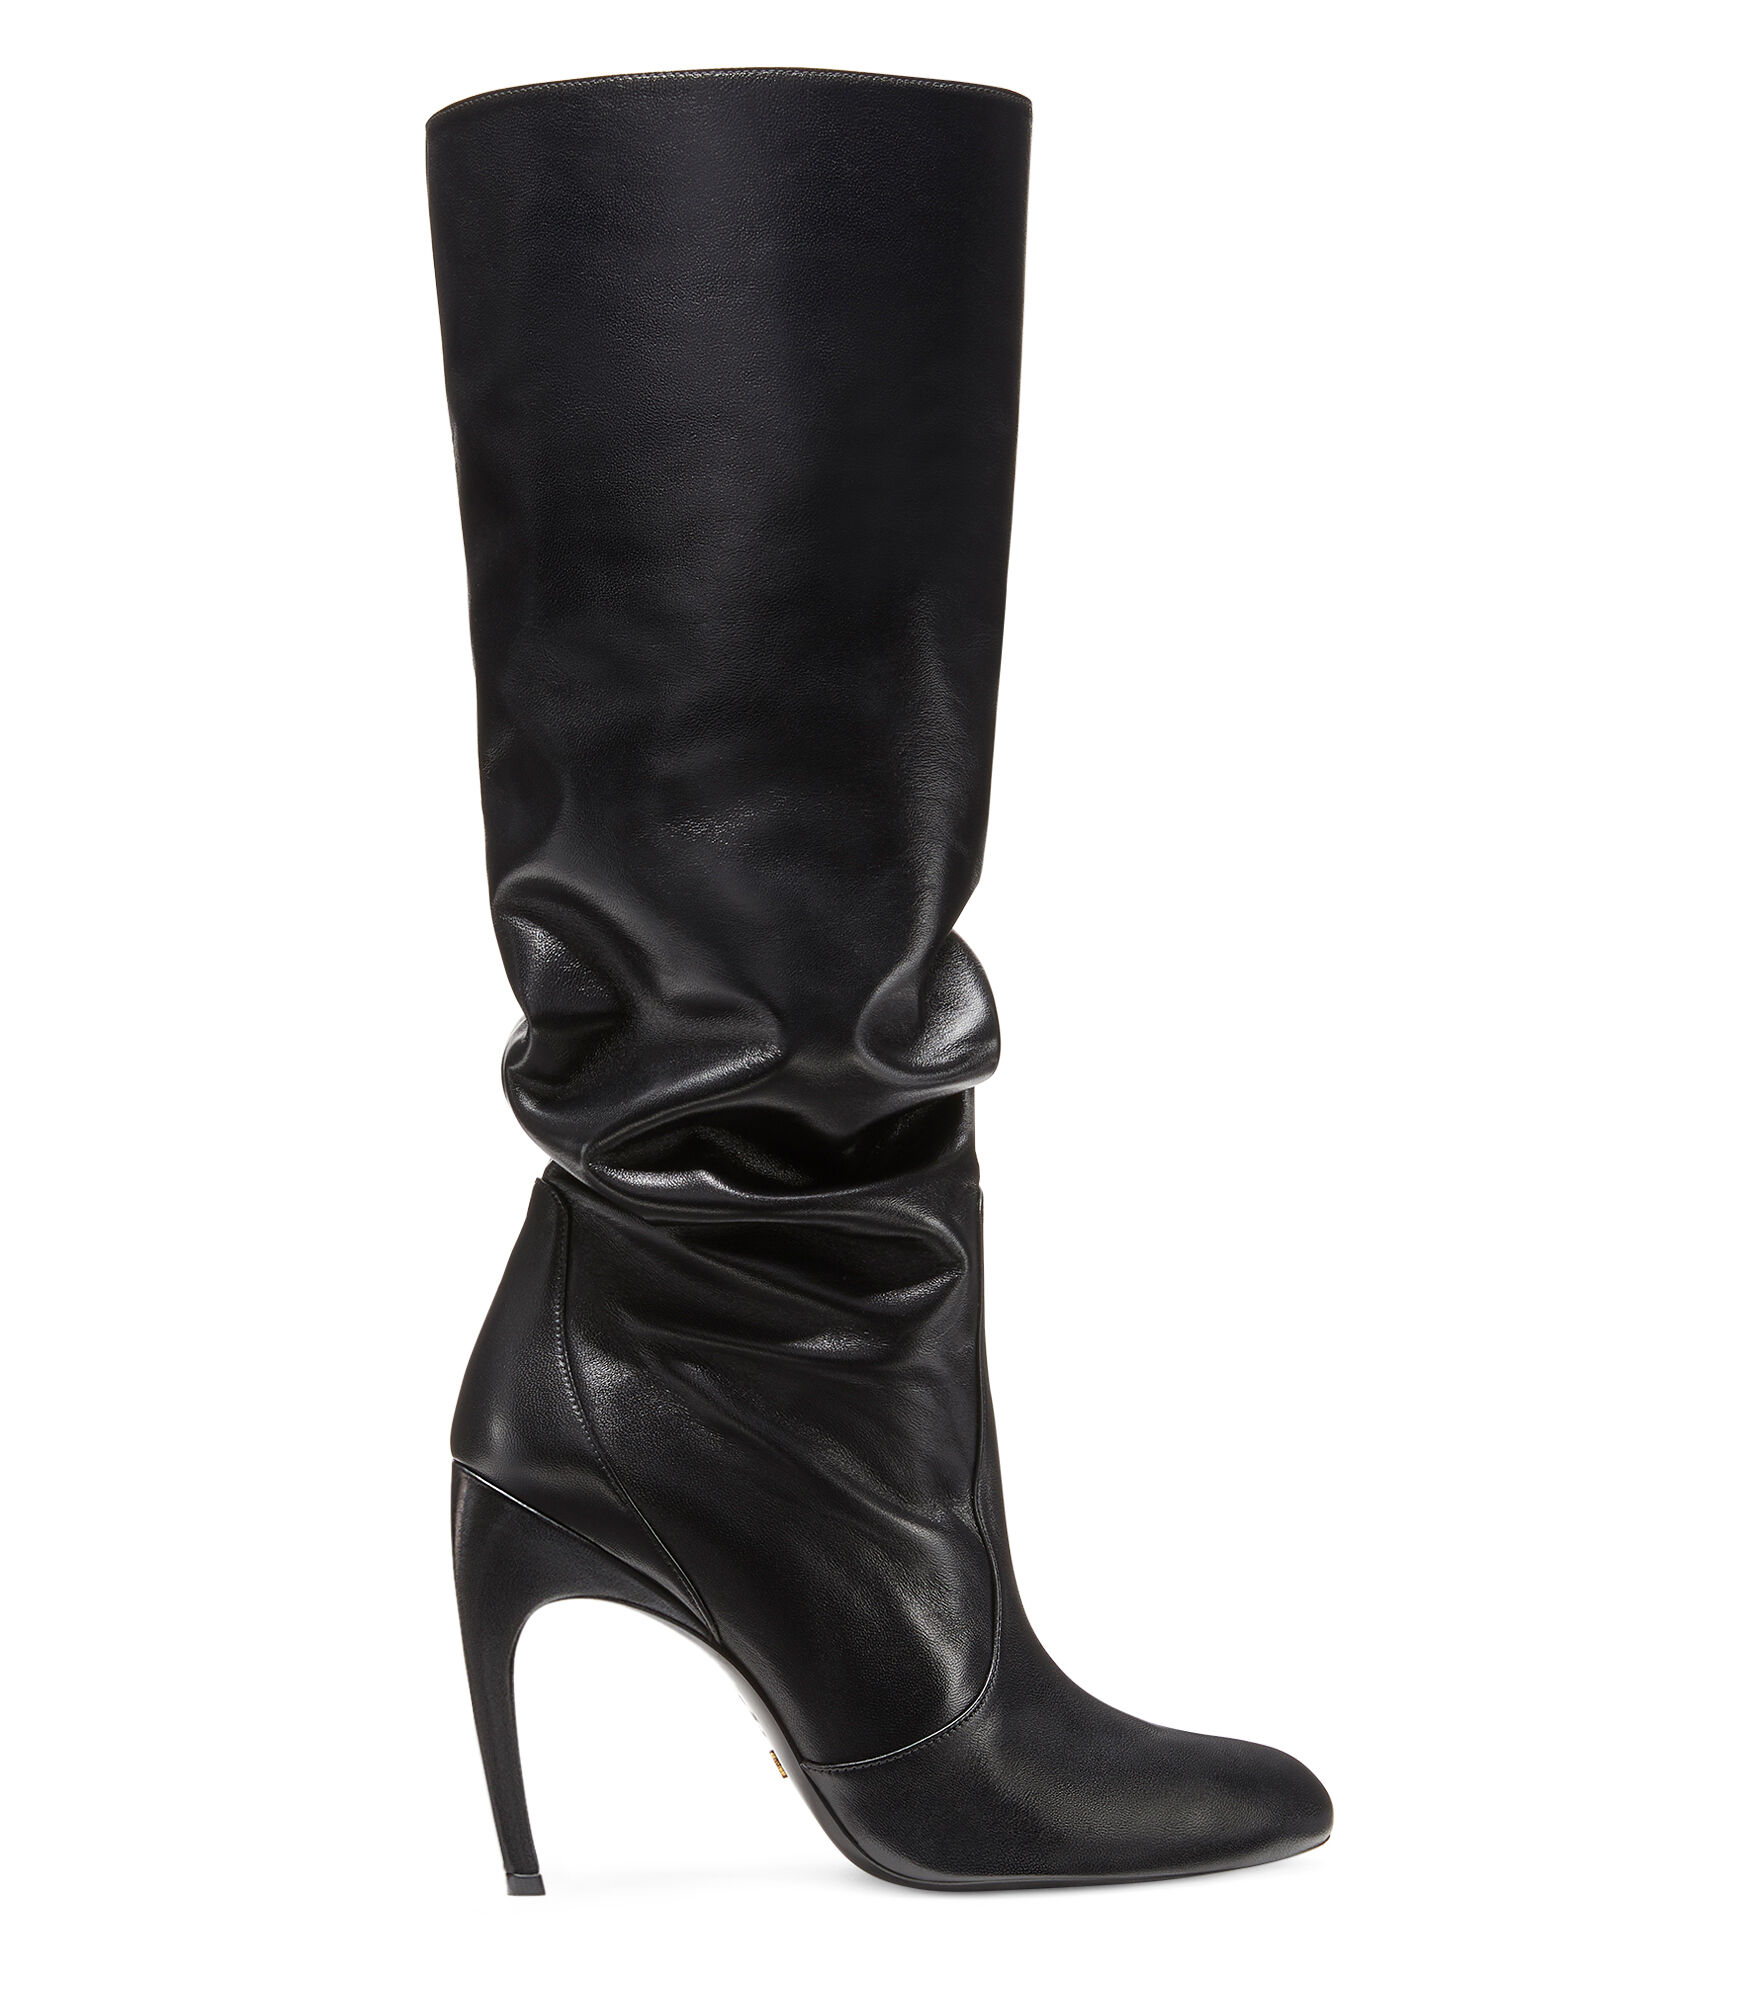 LUXECURVE 100 SLOUCH BOOT in BLACK for Women | Stuart Weitzman®